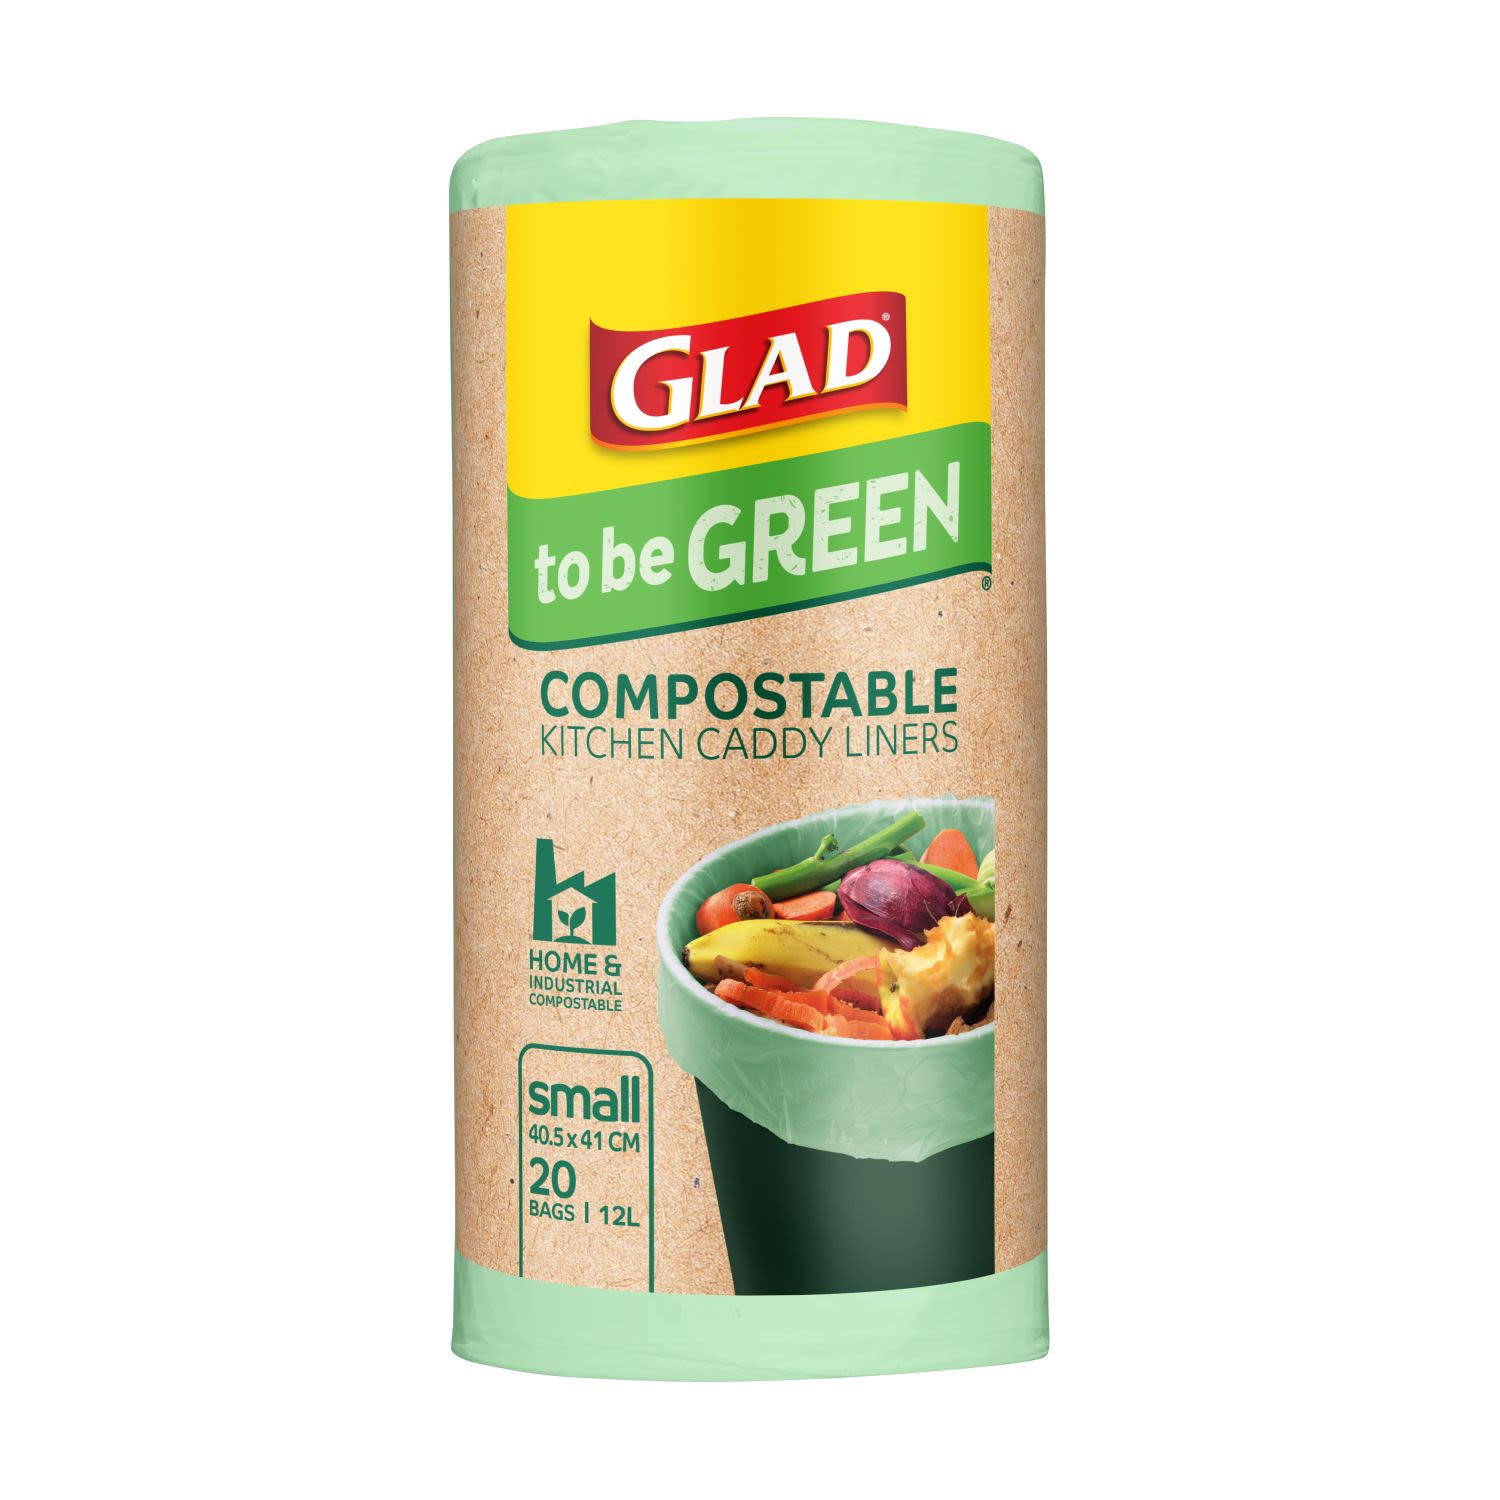 Glad To Be Green Compostable Small, 20 Each